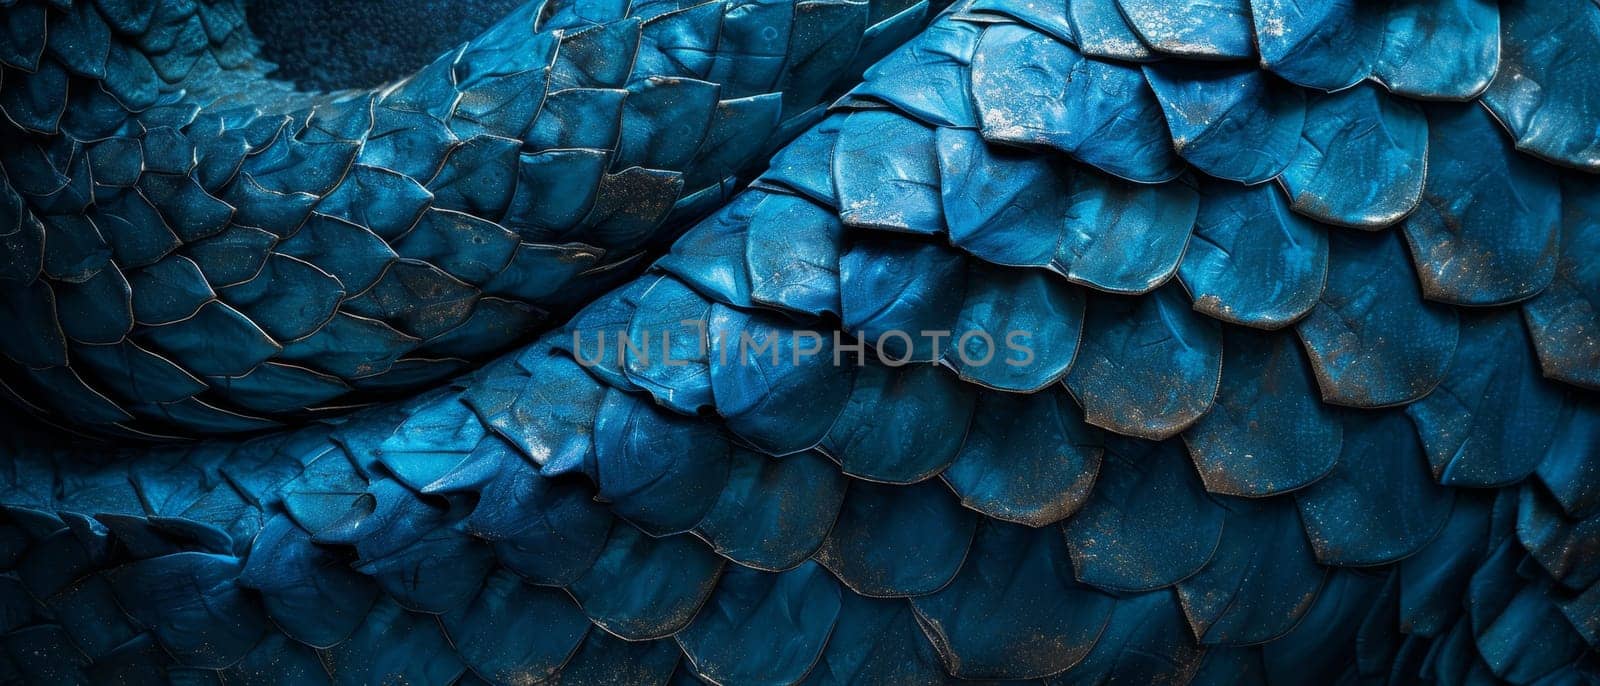 Blue dragon scale pattern close-up - luxury background texture for wallpaper. by sfinks